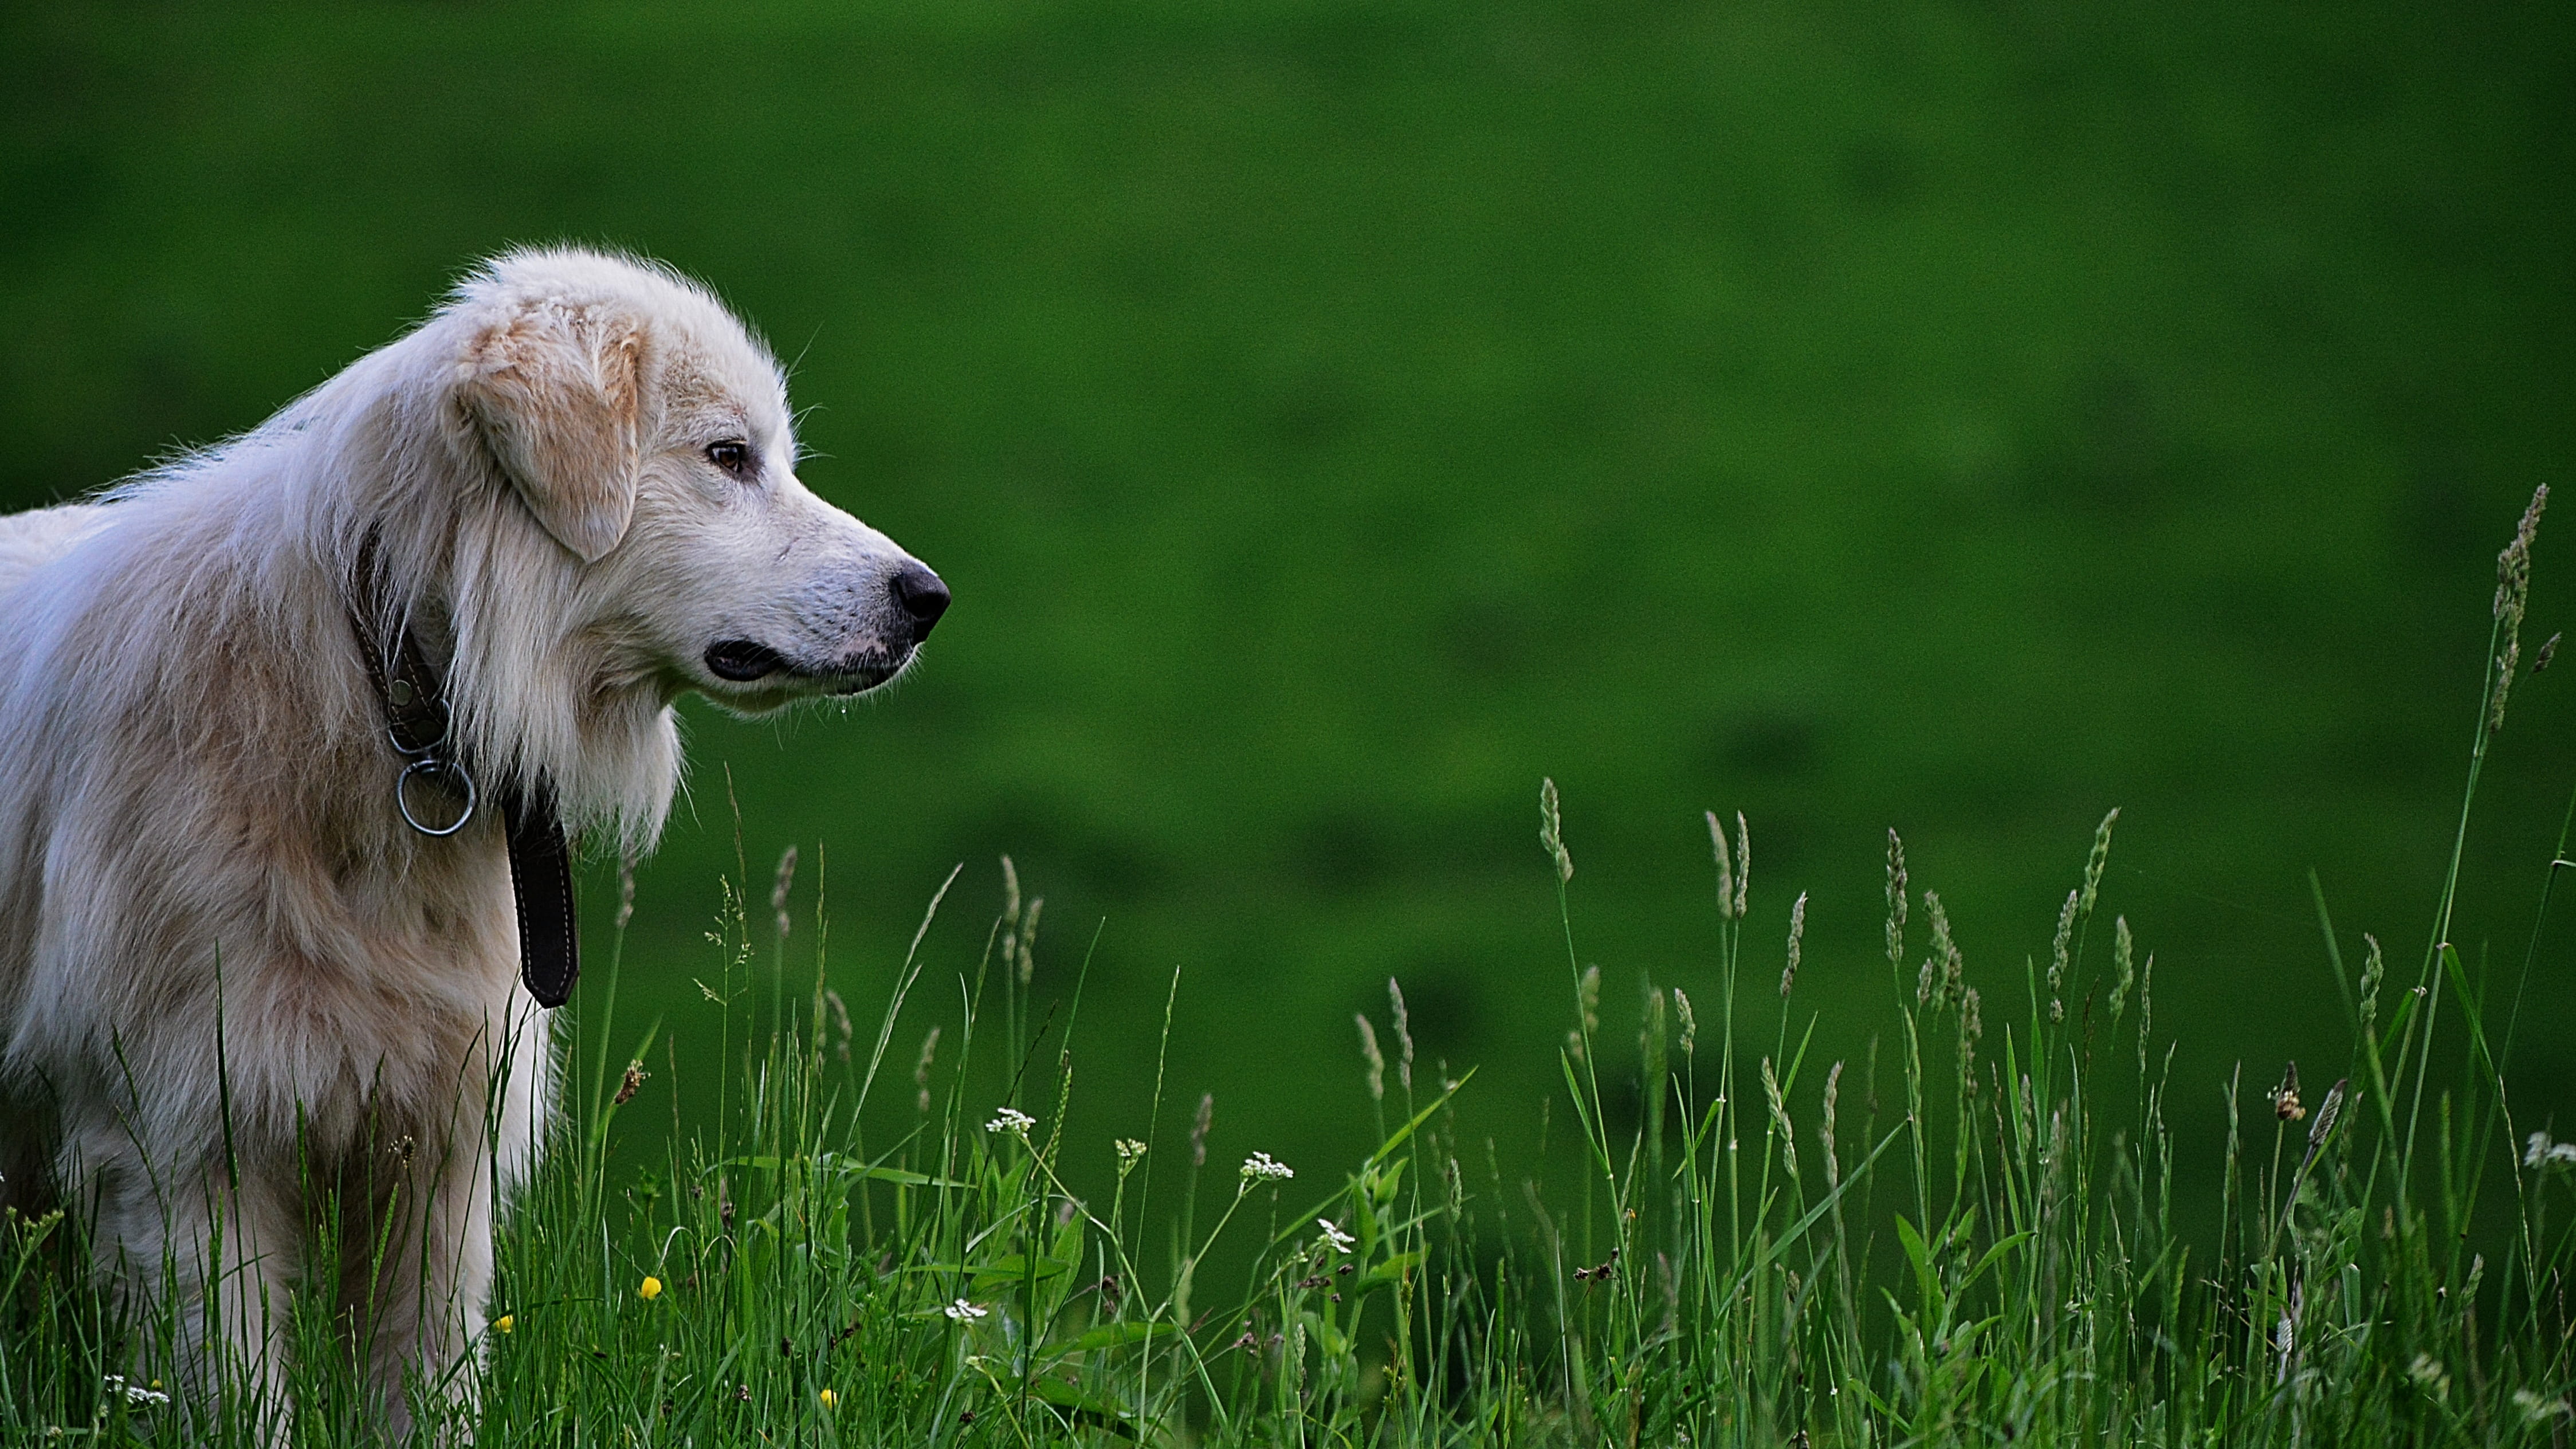 dog on green grass at daytime, adult golden retriever standing on field